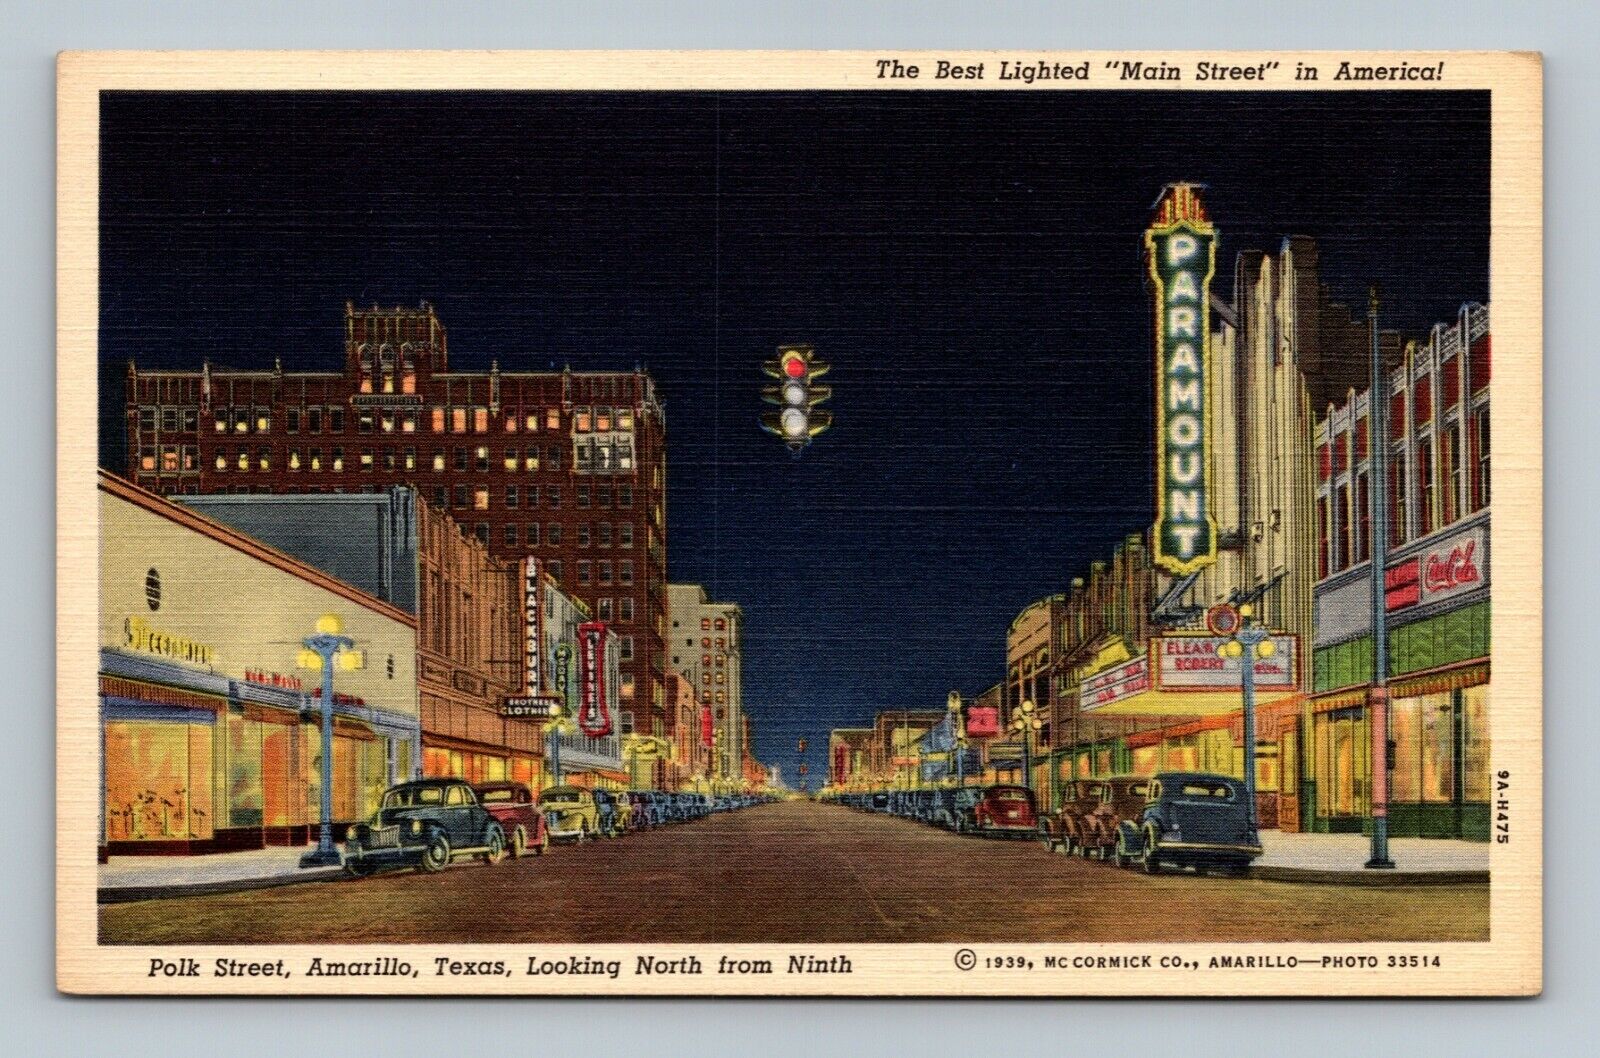 Best Lighted Main Street in America, Paramout Theater - Amarillo, Texas Postcard